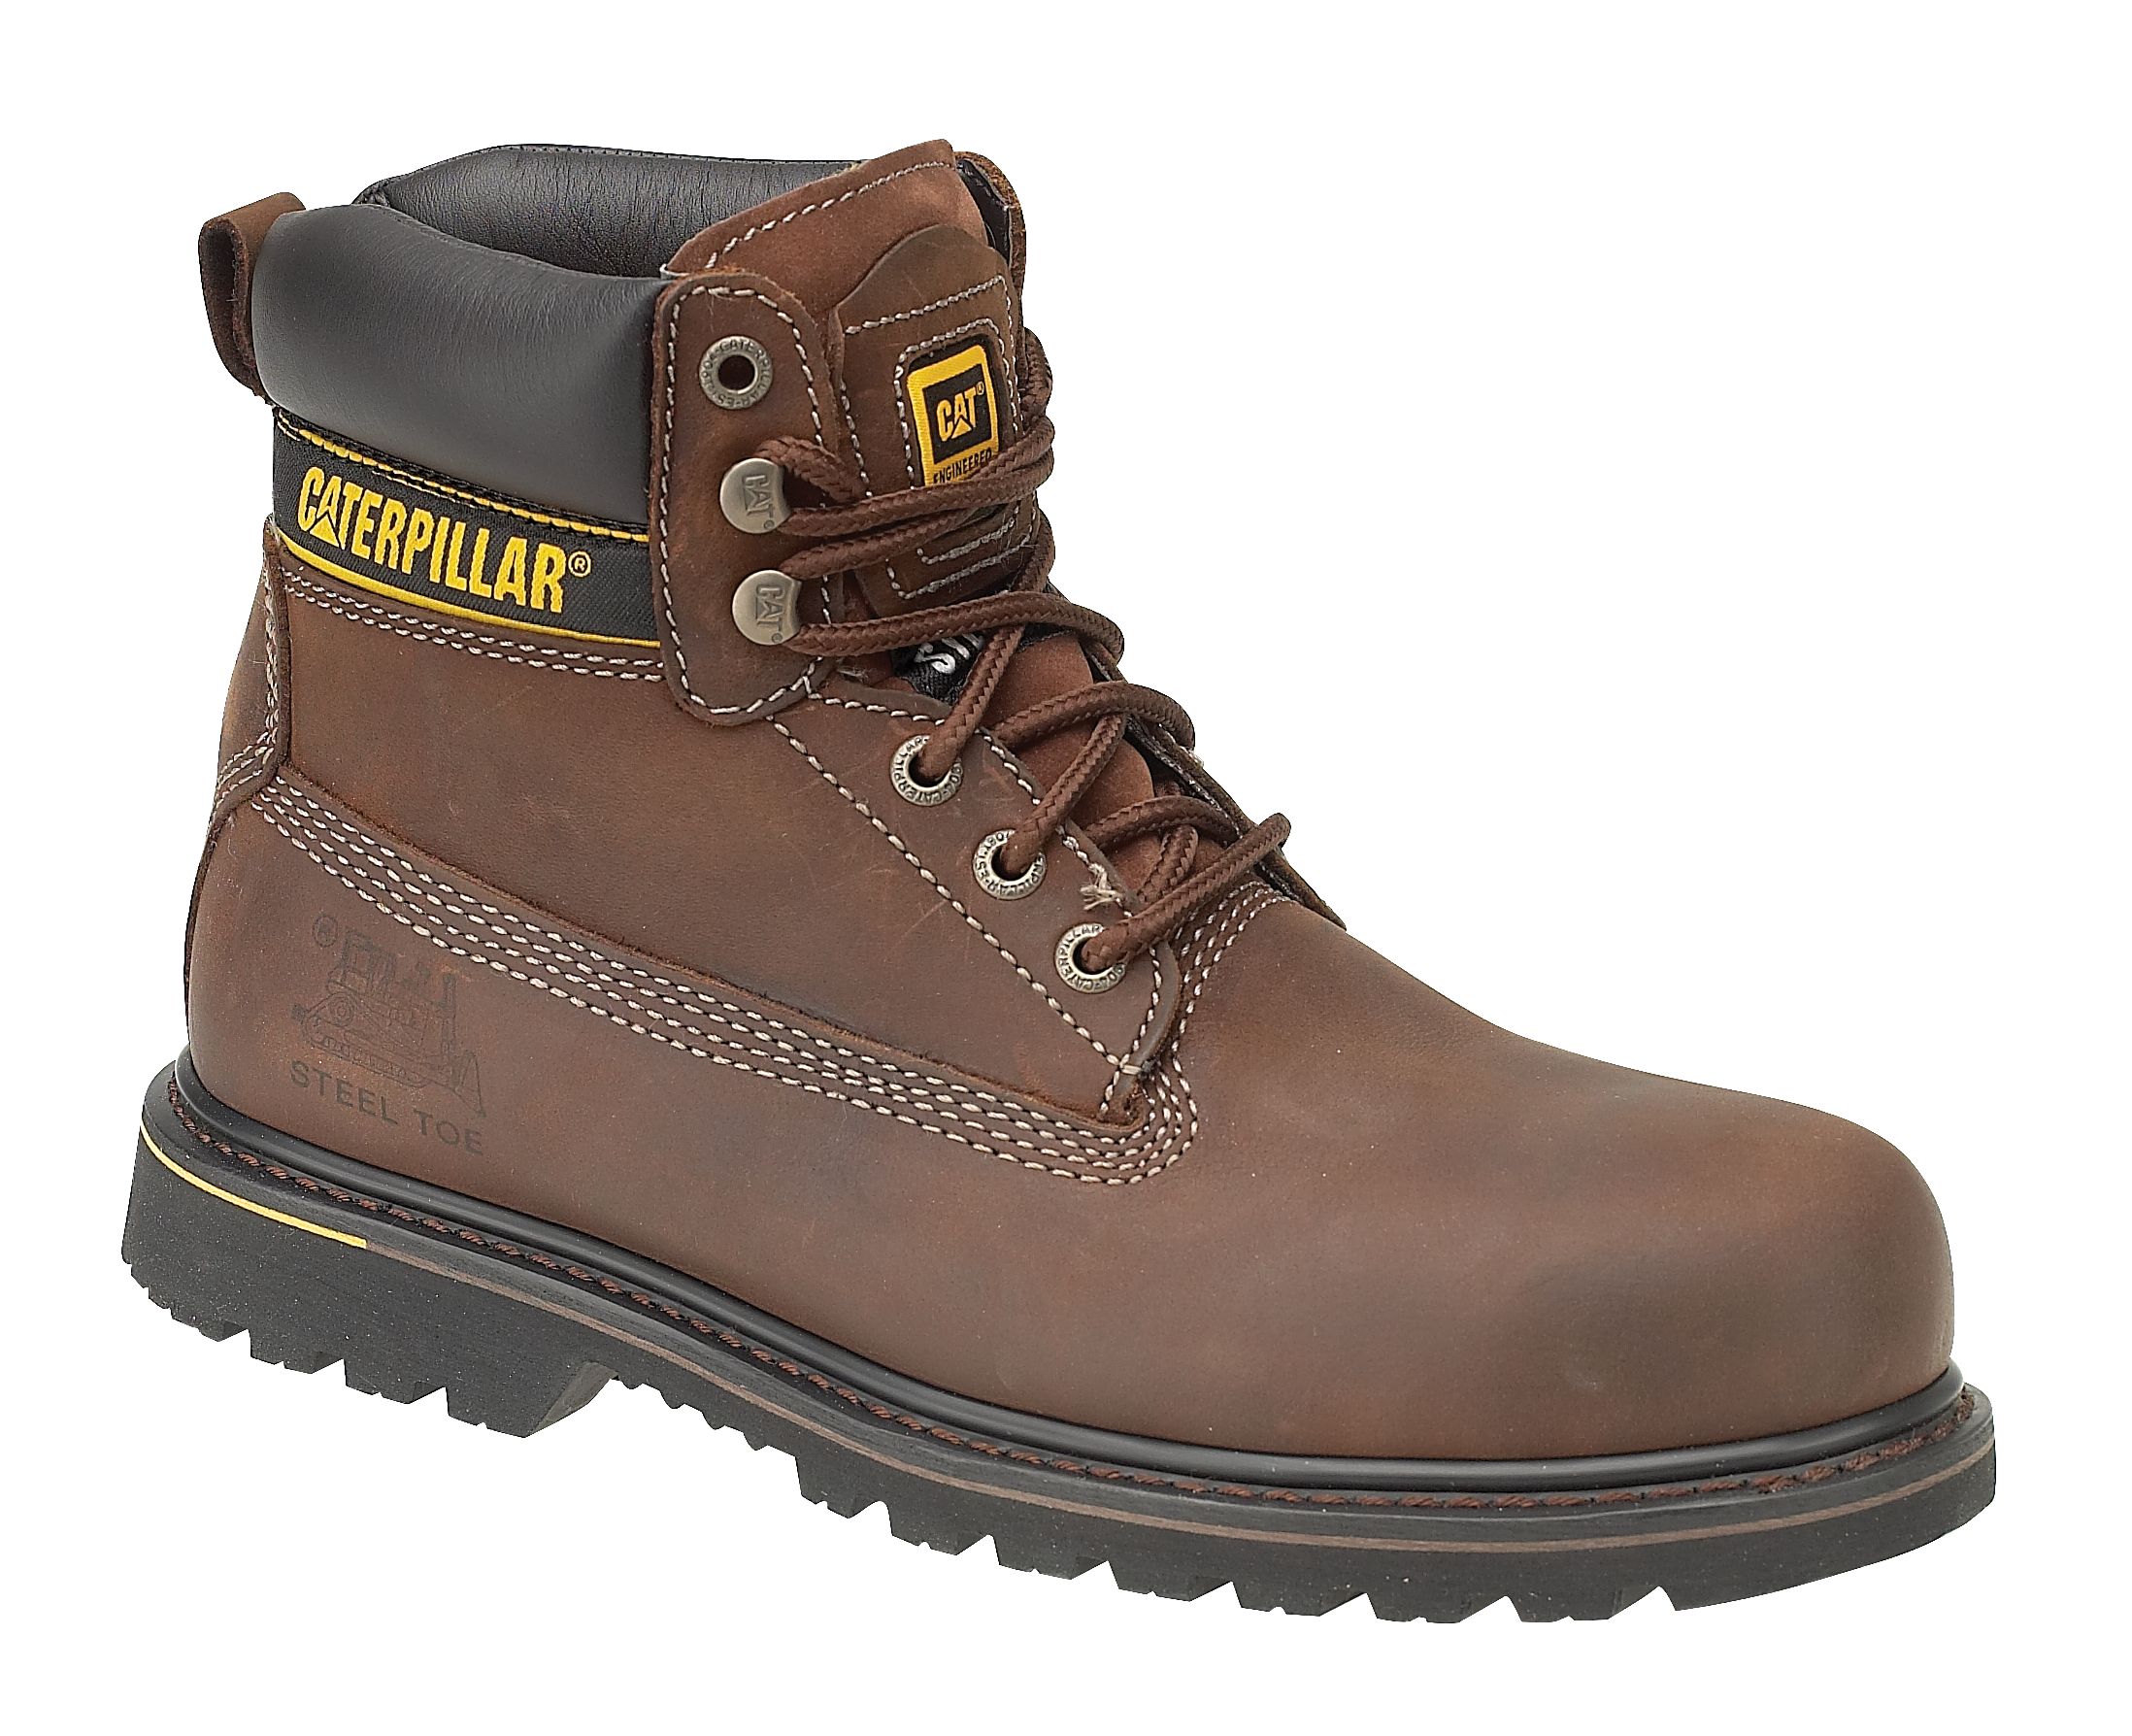 Image of Caterpillar CAT Holton SB Safety Boot - Brown Size 7